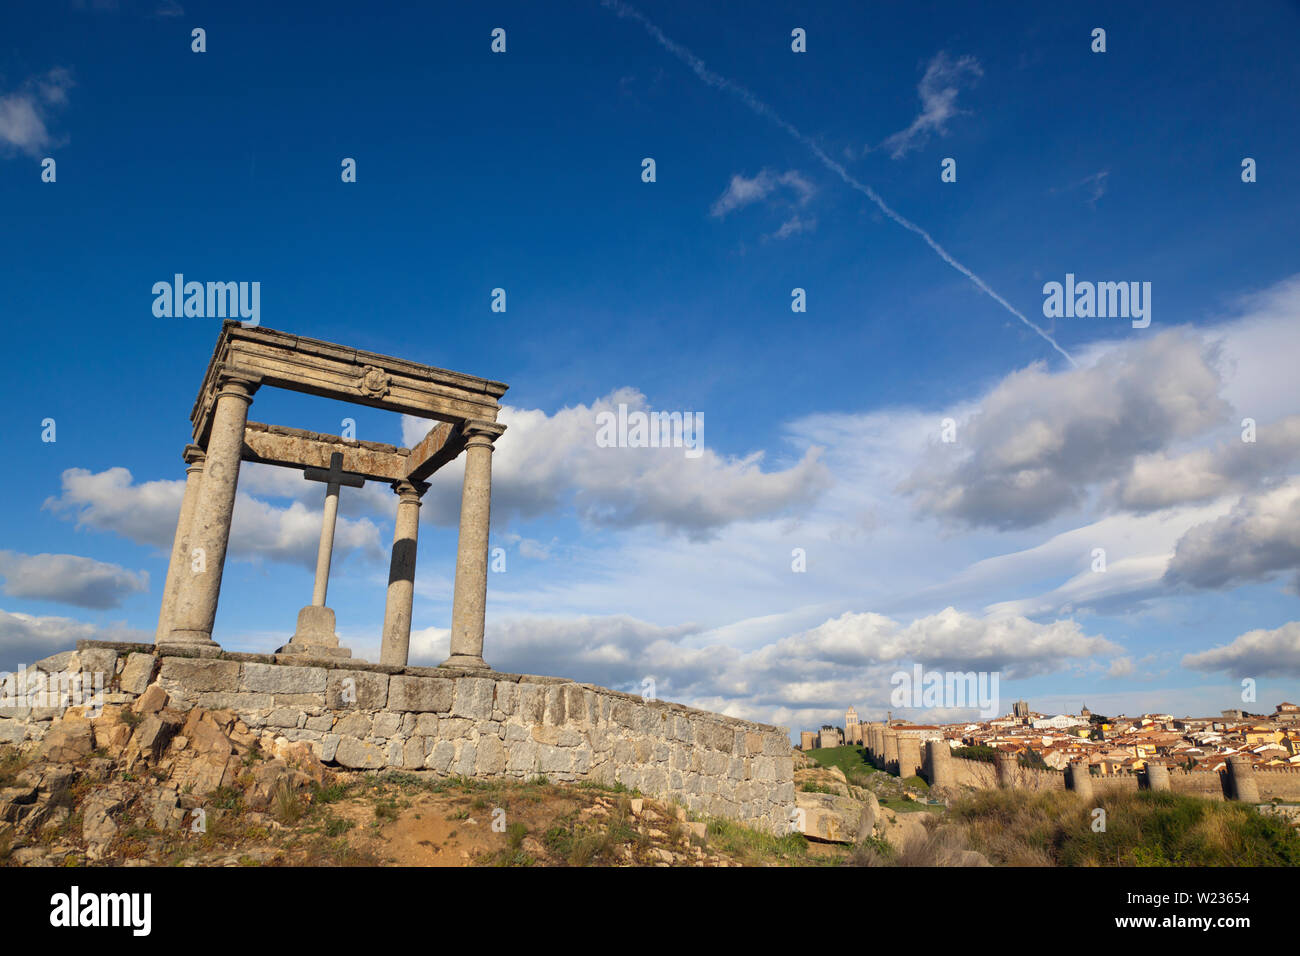 Avila, Avila Province, Castile and Leon, Spain.  The walled city seen from Los Cuatro Postes or The Four Pillars.  The old town of Avila with its extr Stock Photo